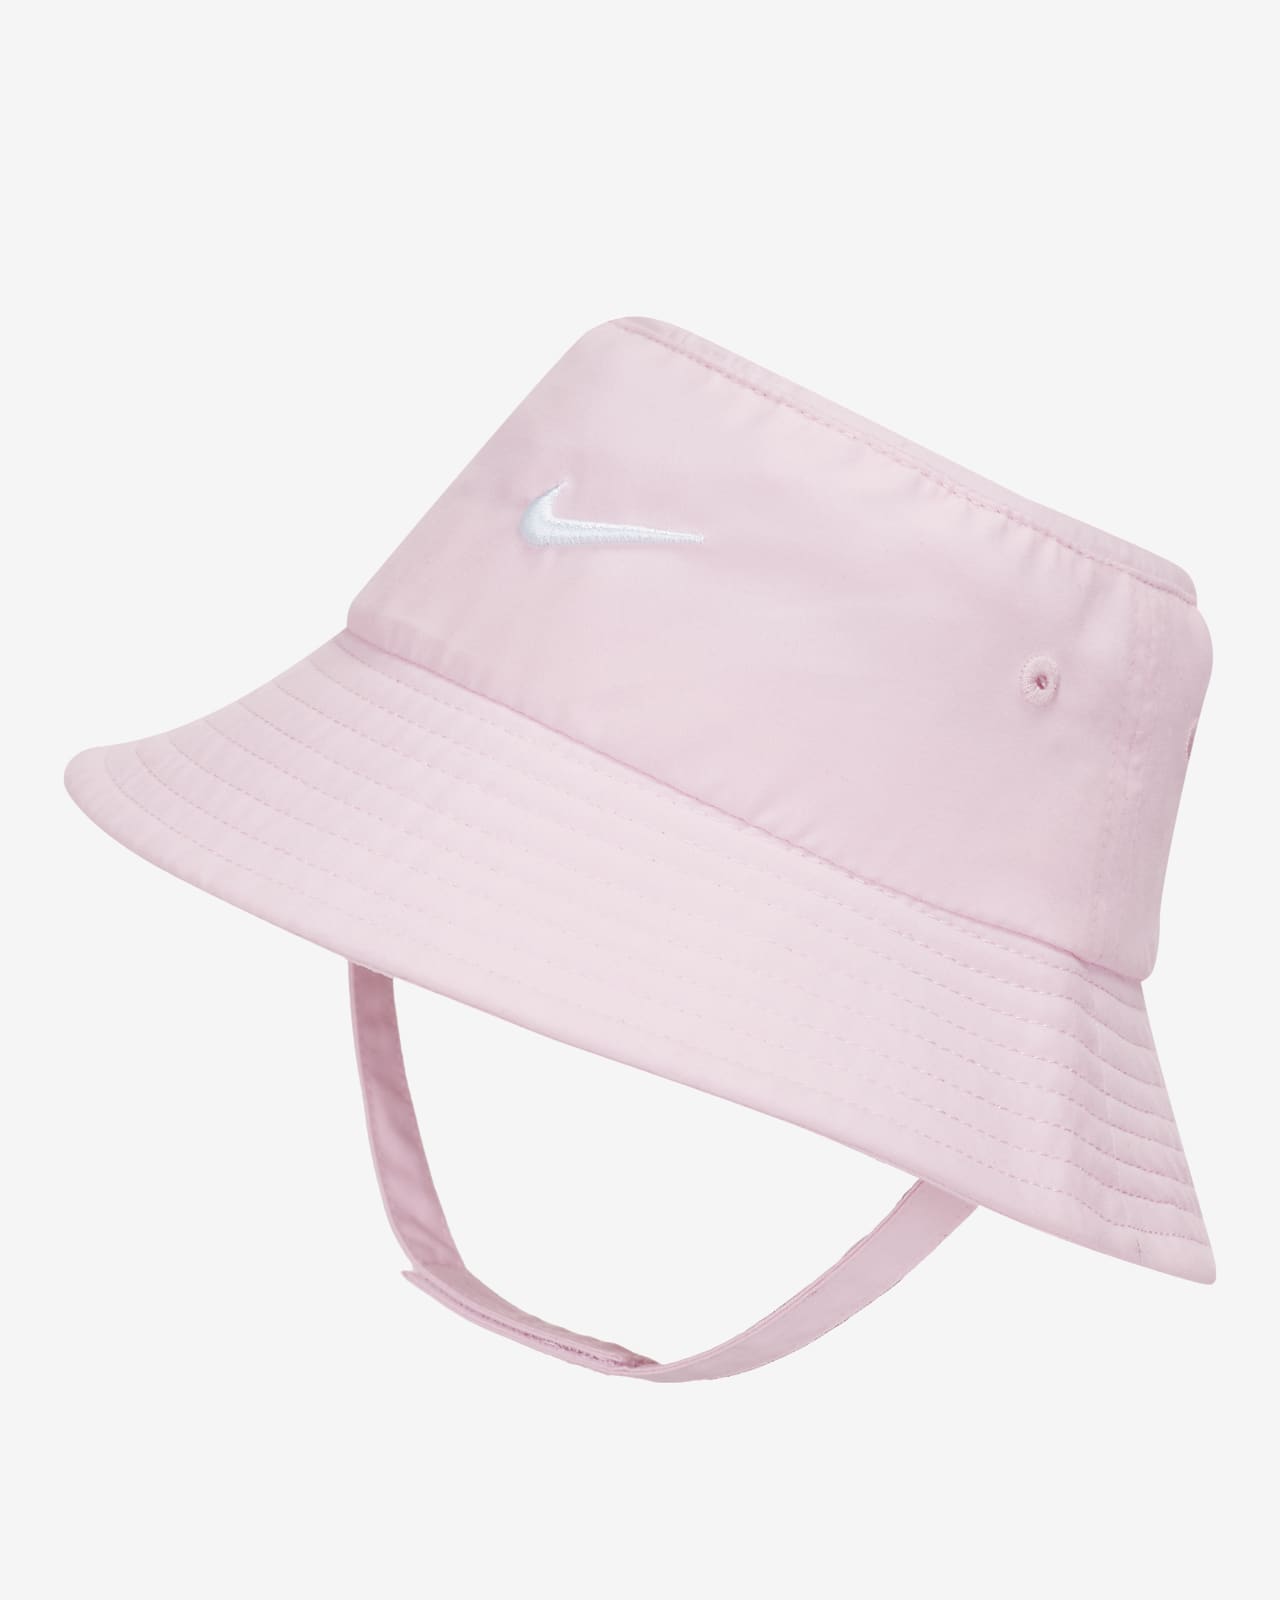 nike bucket hat for baby